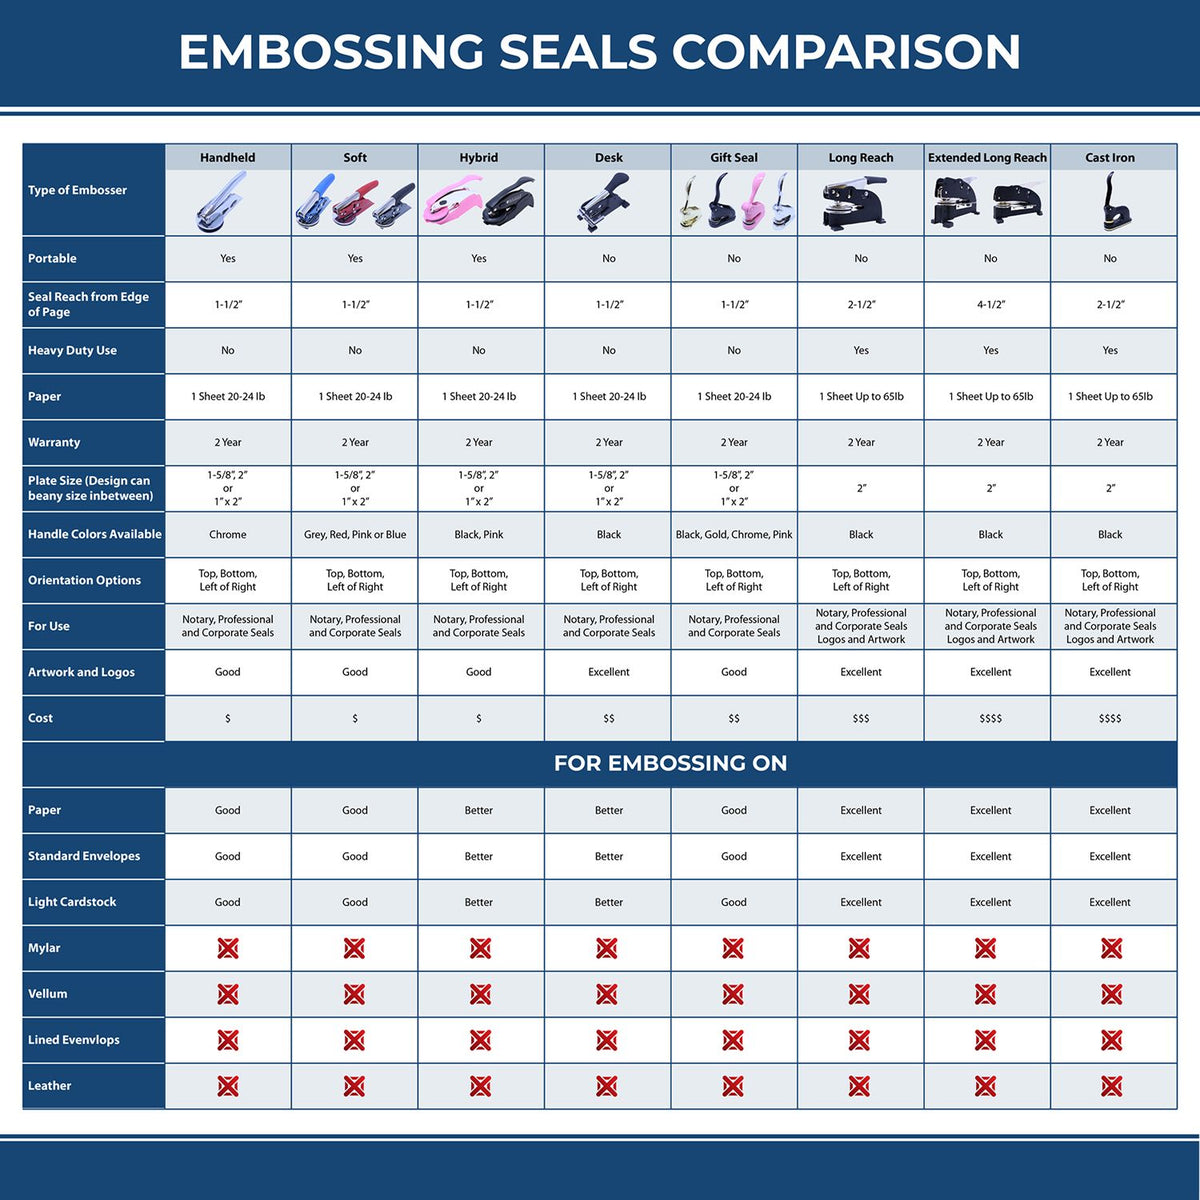 A comparison chart for the different types of mount models available for the Gift Alaska Architect Seal